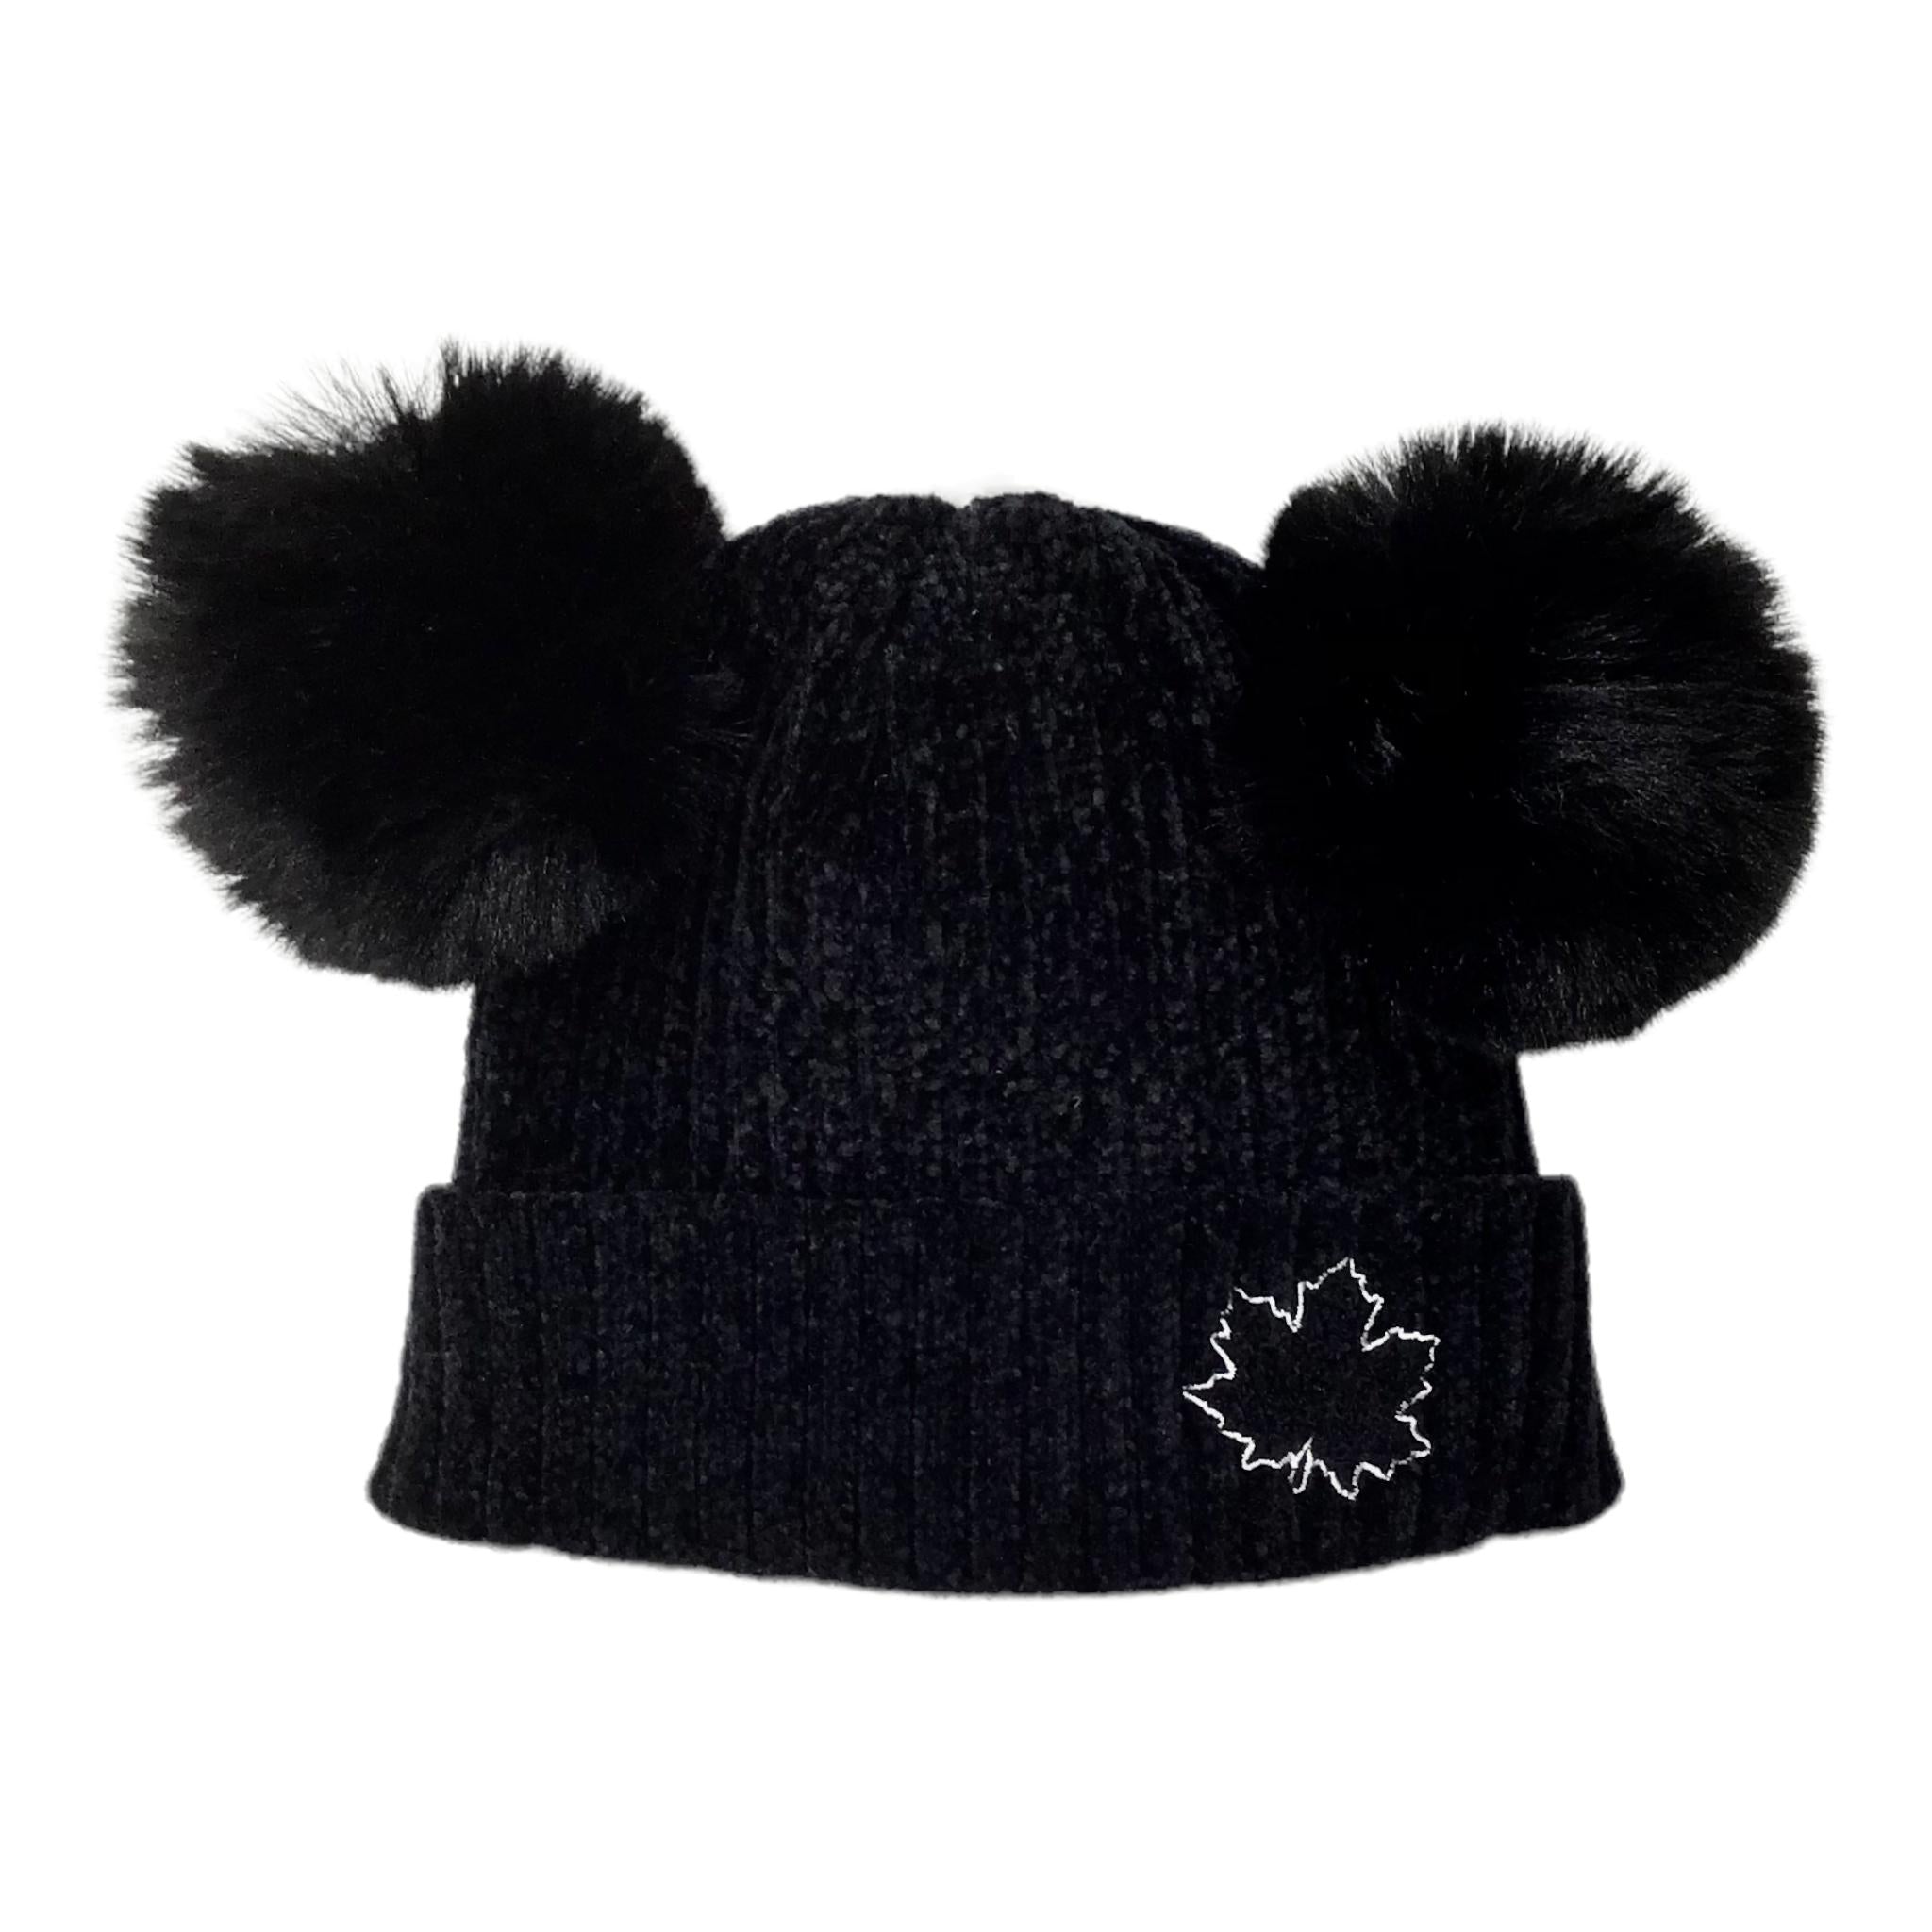 BLACK MICKEY MOUSE MAPLE LEAF BEANIE - POMPOM HAT